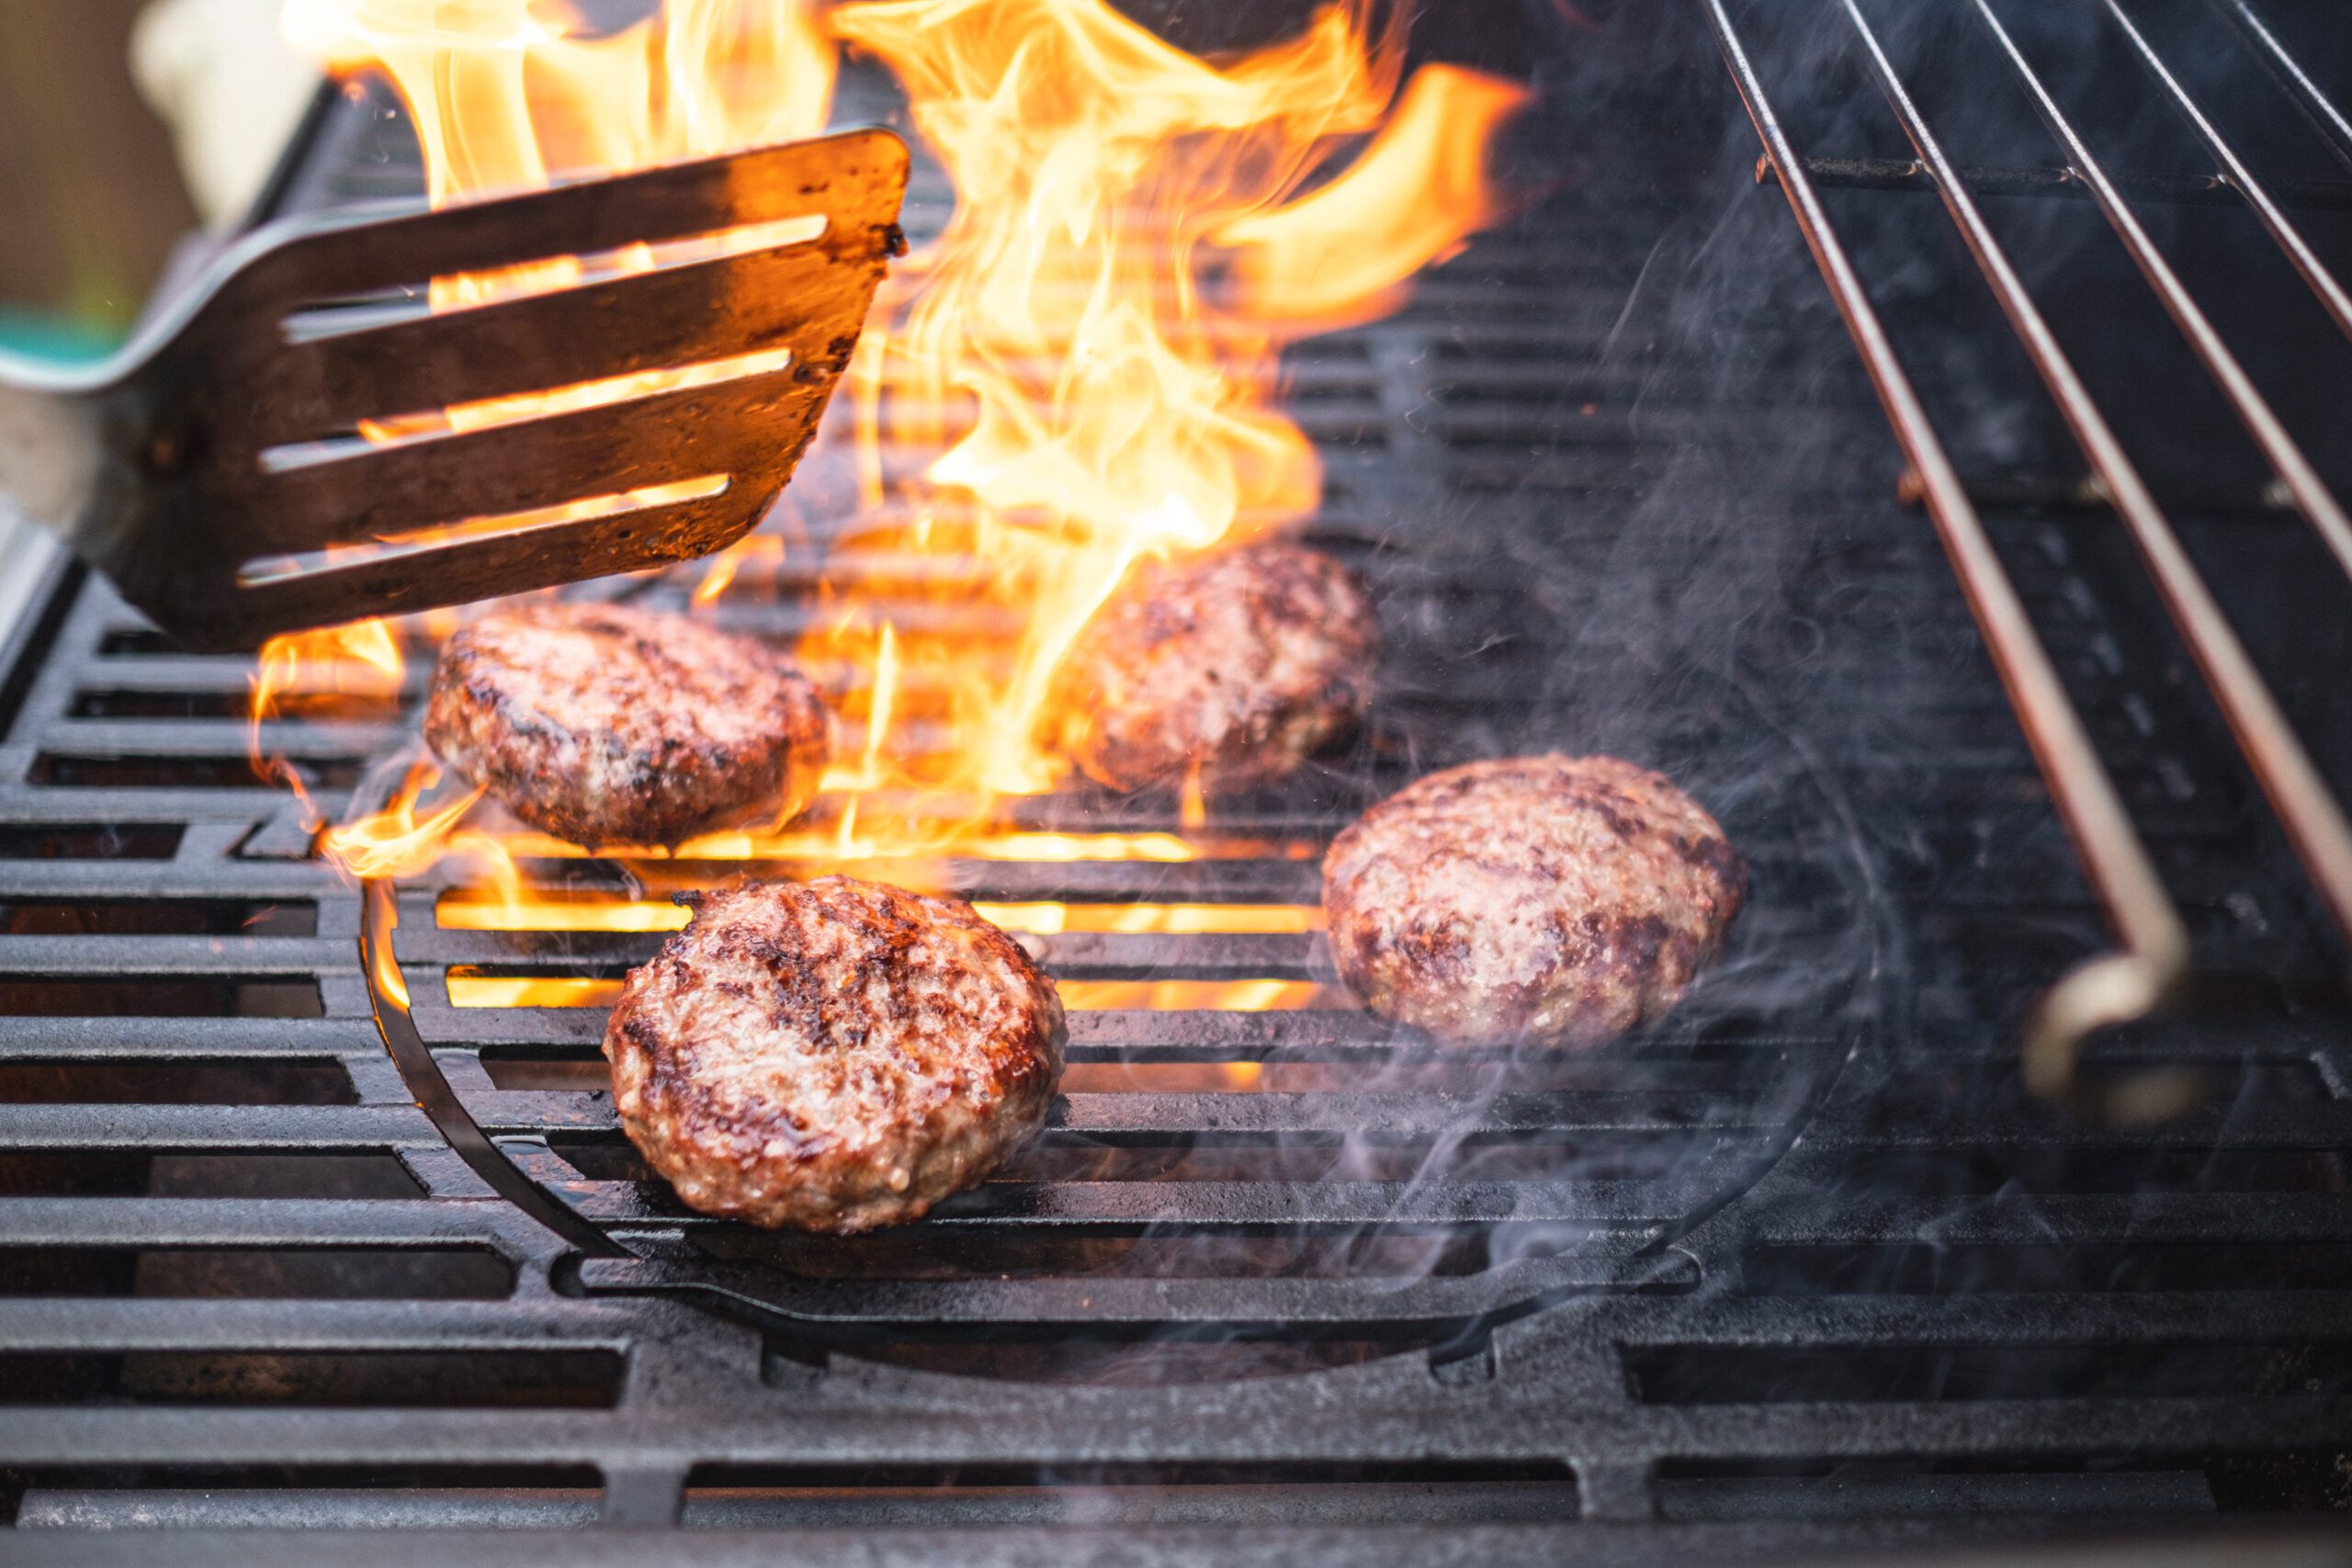 How to Prep Your Grill